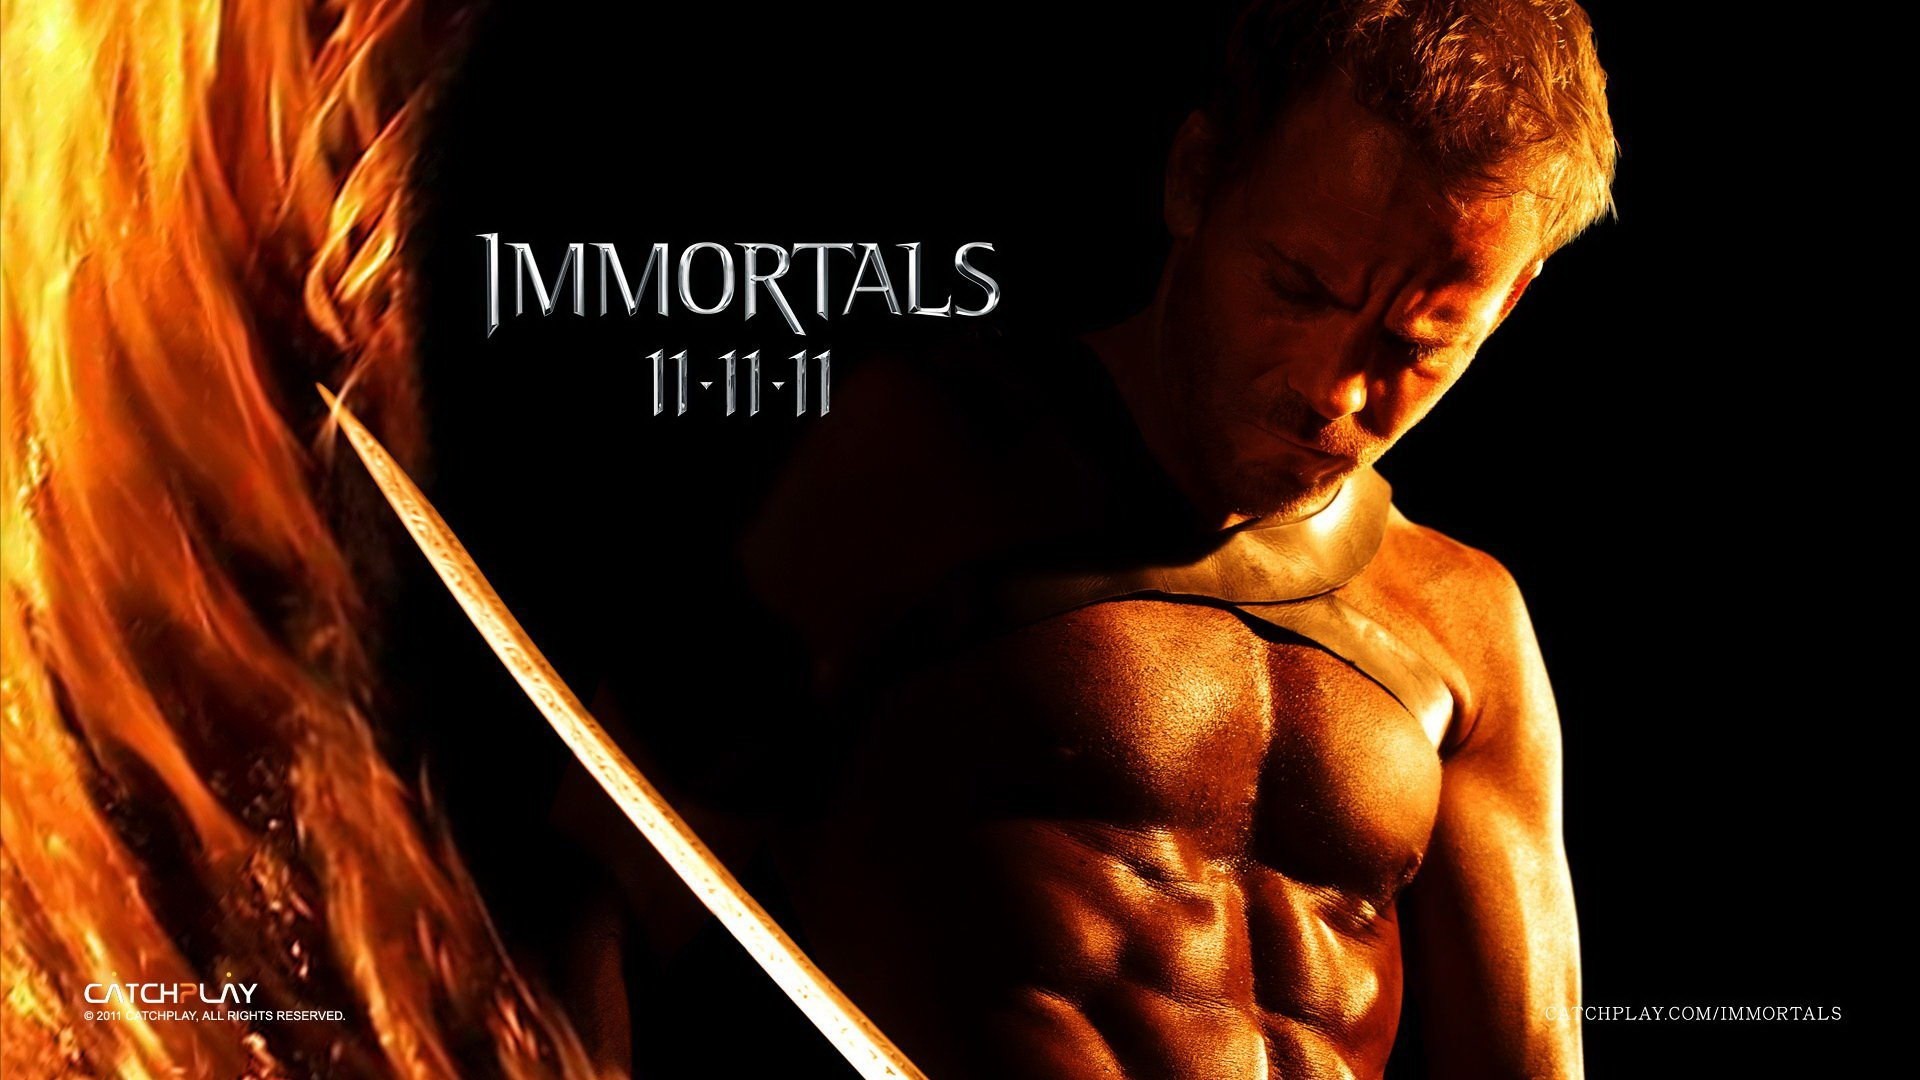 General 1920x1080 movies Immortals movie poster promotional men